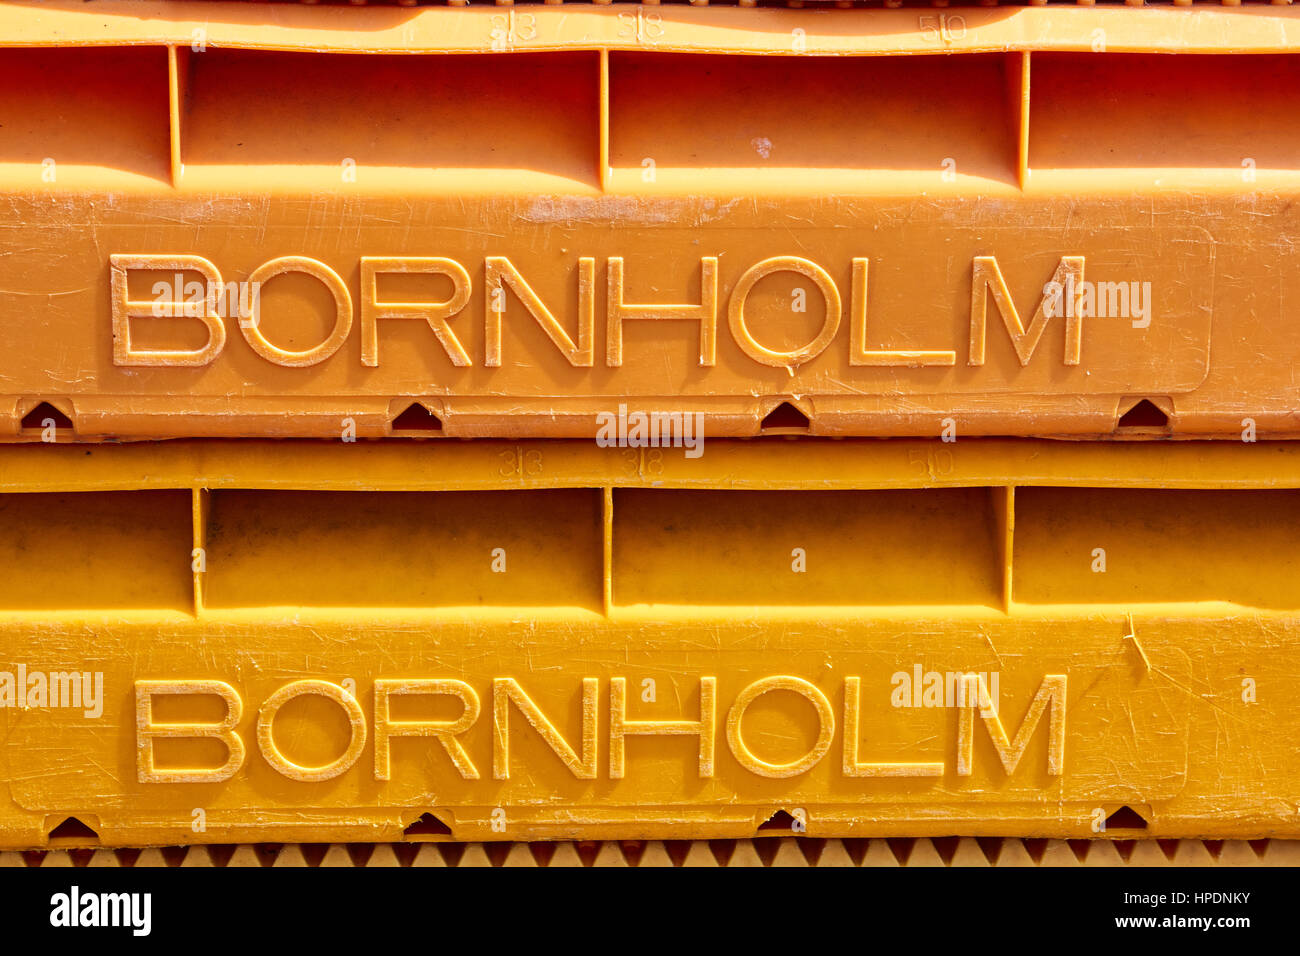 Section of two plastic fish crates with the text Bornholm  raised from the surface. Bornholm is the name of the Island - not a company Stock Photo